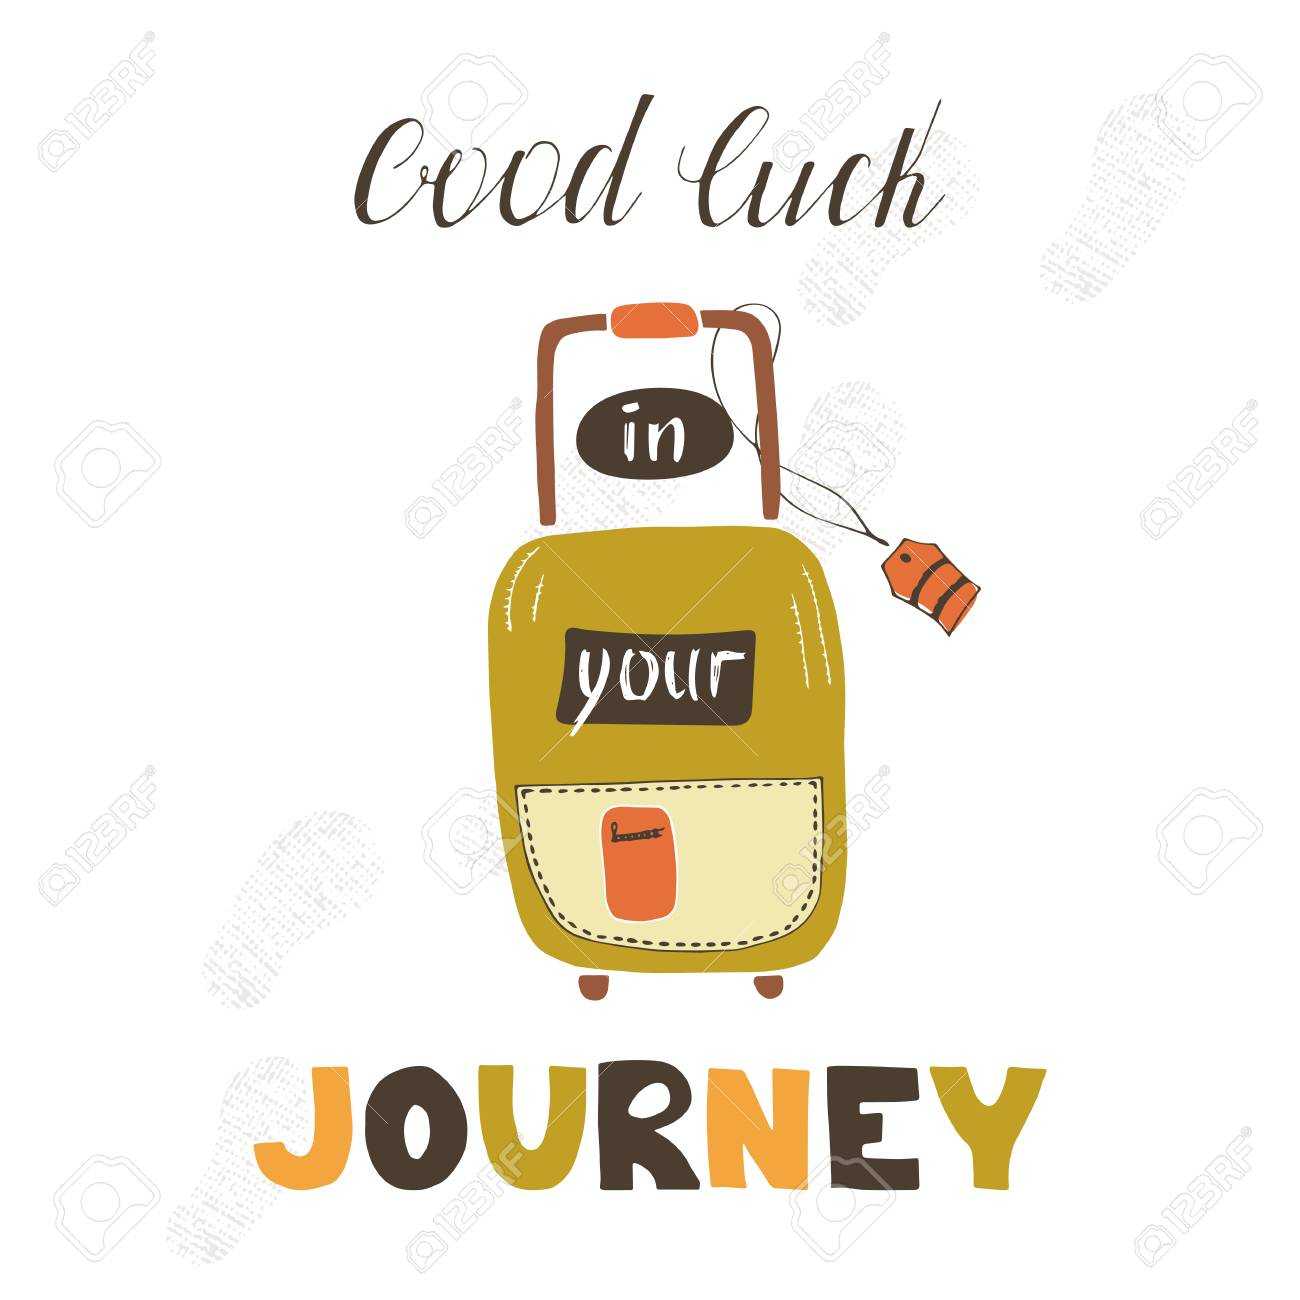 Travel Card Template With Suitcase. Greeting Postcard With Hand.. Within Good Luck Banner Template